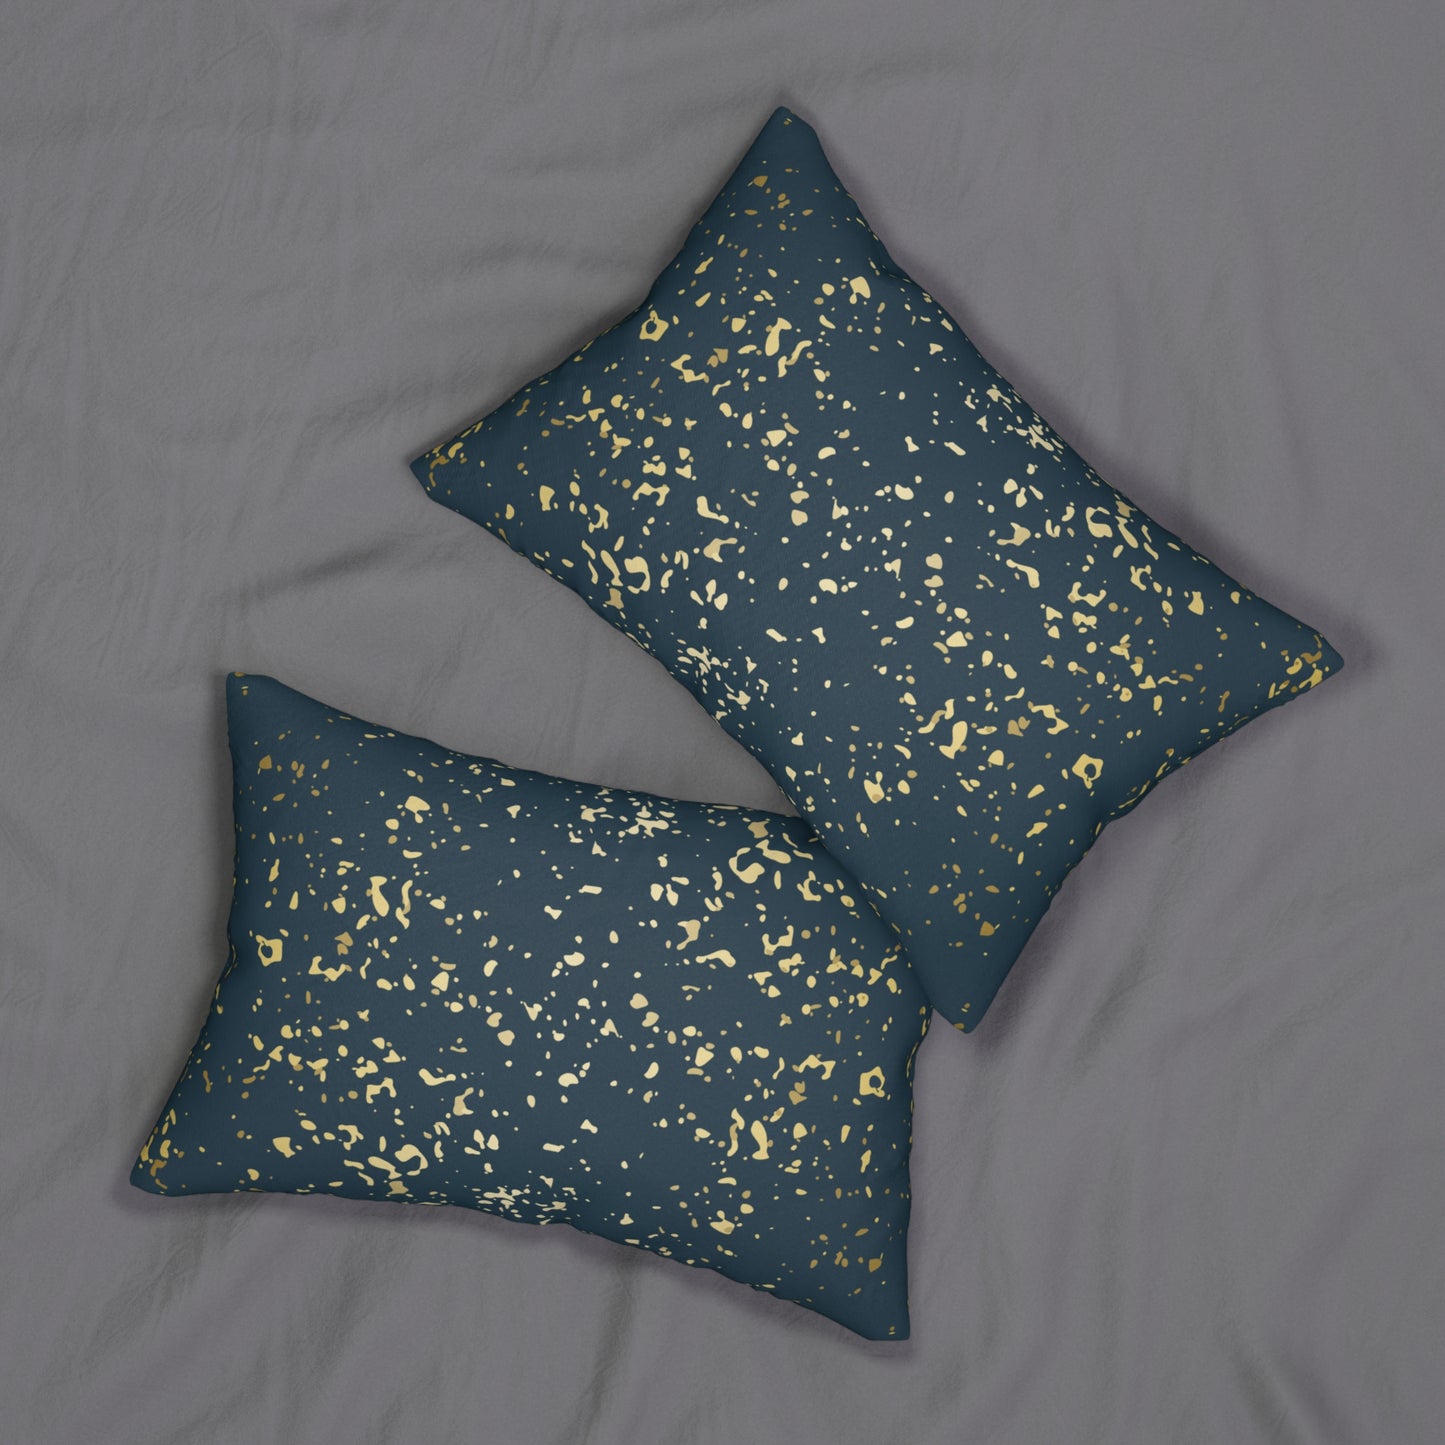 Dark Teal and Gold Flakes Accent Pillow